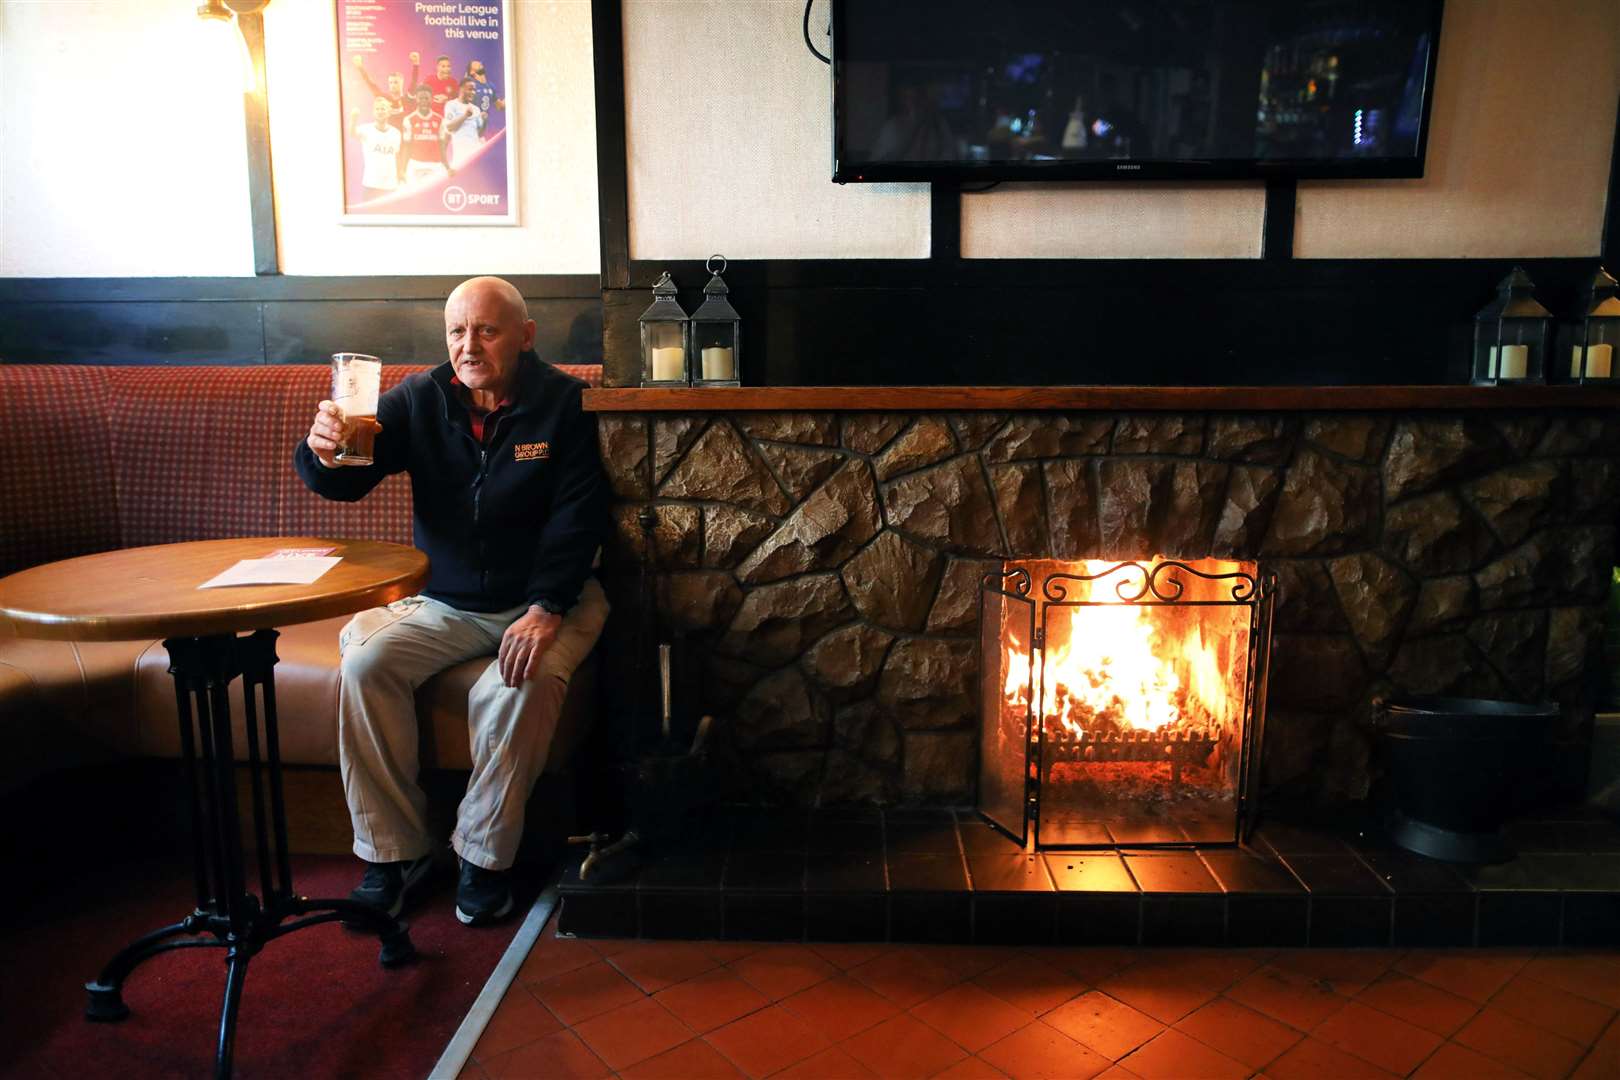 Phil Goldstraw enjoys a pint in the Hole in the Wall pub in Armagh as it reopened in September after Covid-19 restrictions (Peter Morrison/PA)